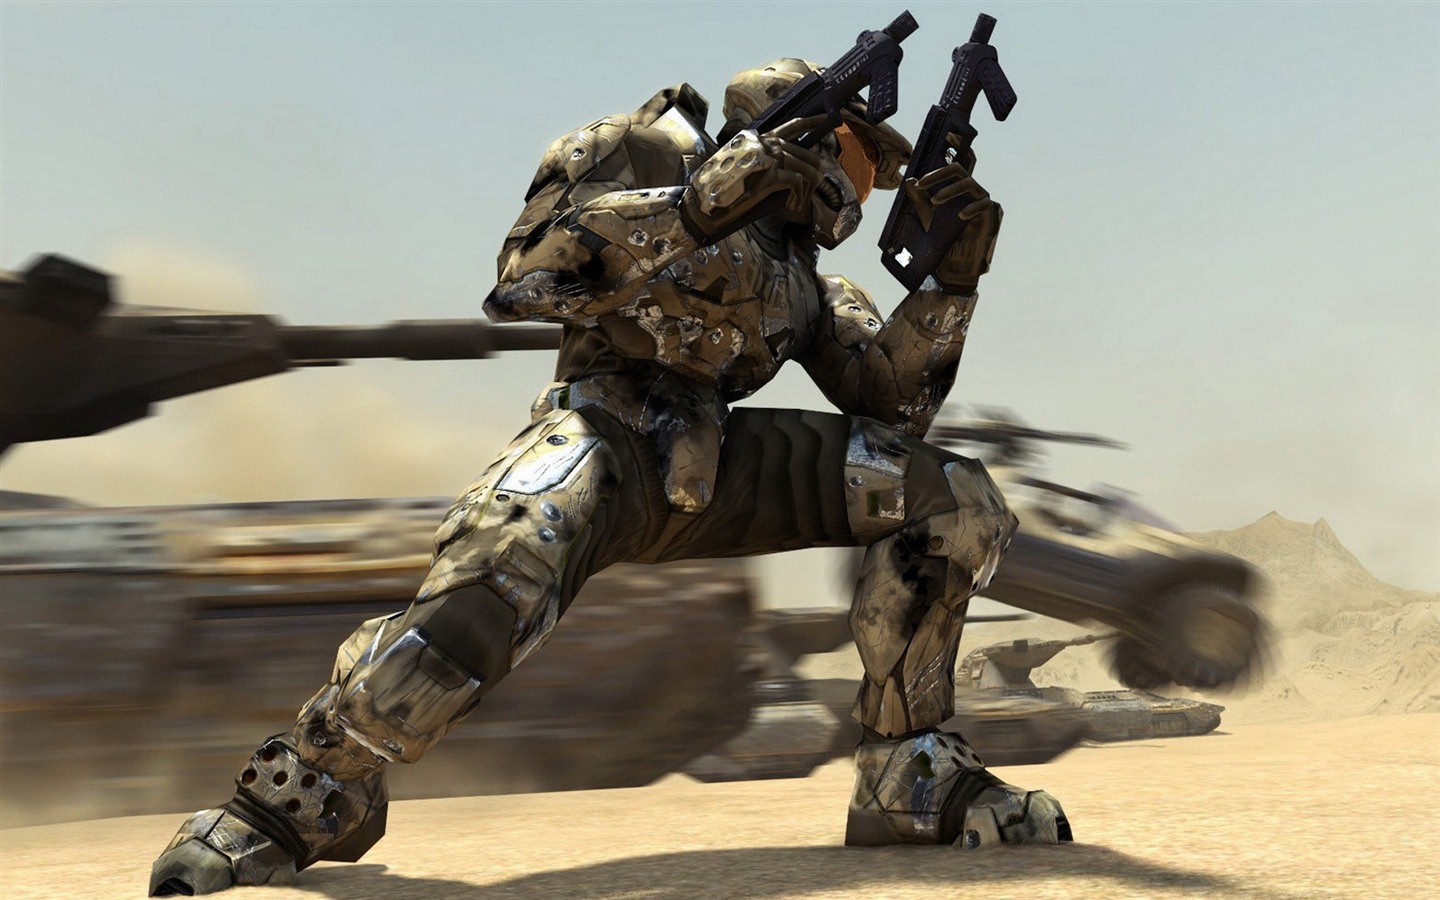 Halo game HD wallpapers #11 - 1440x900